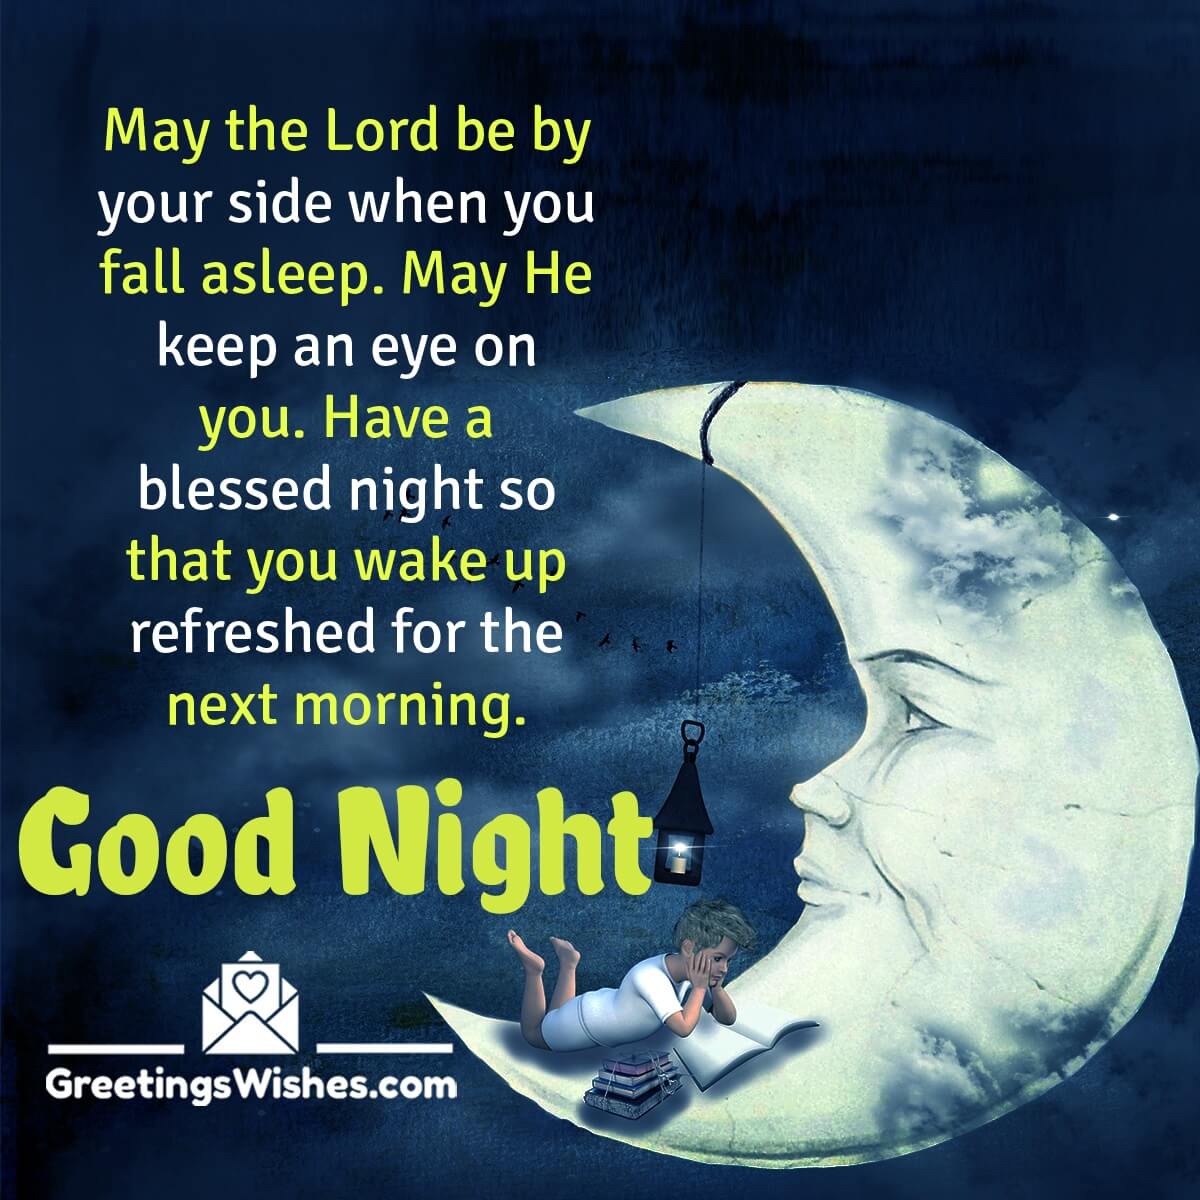 good night god bless quotes